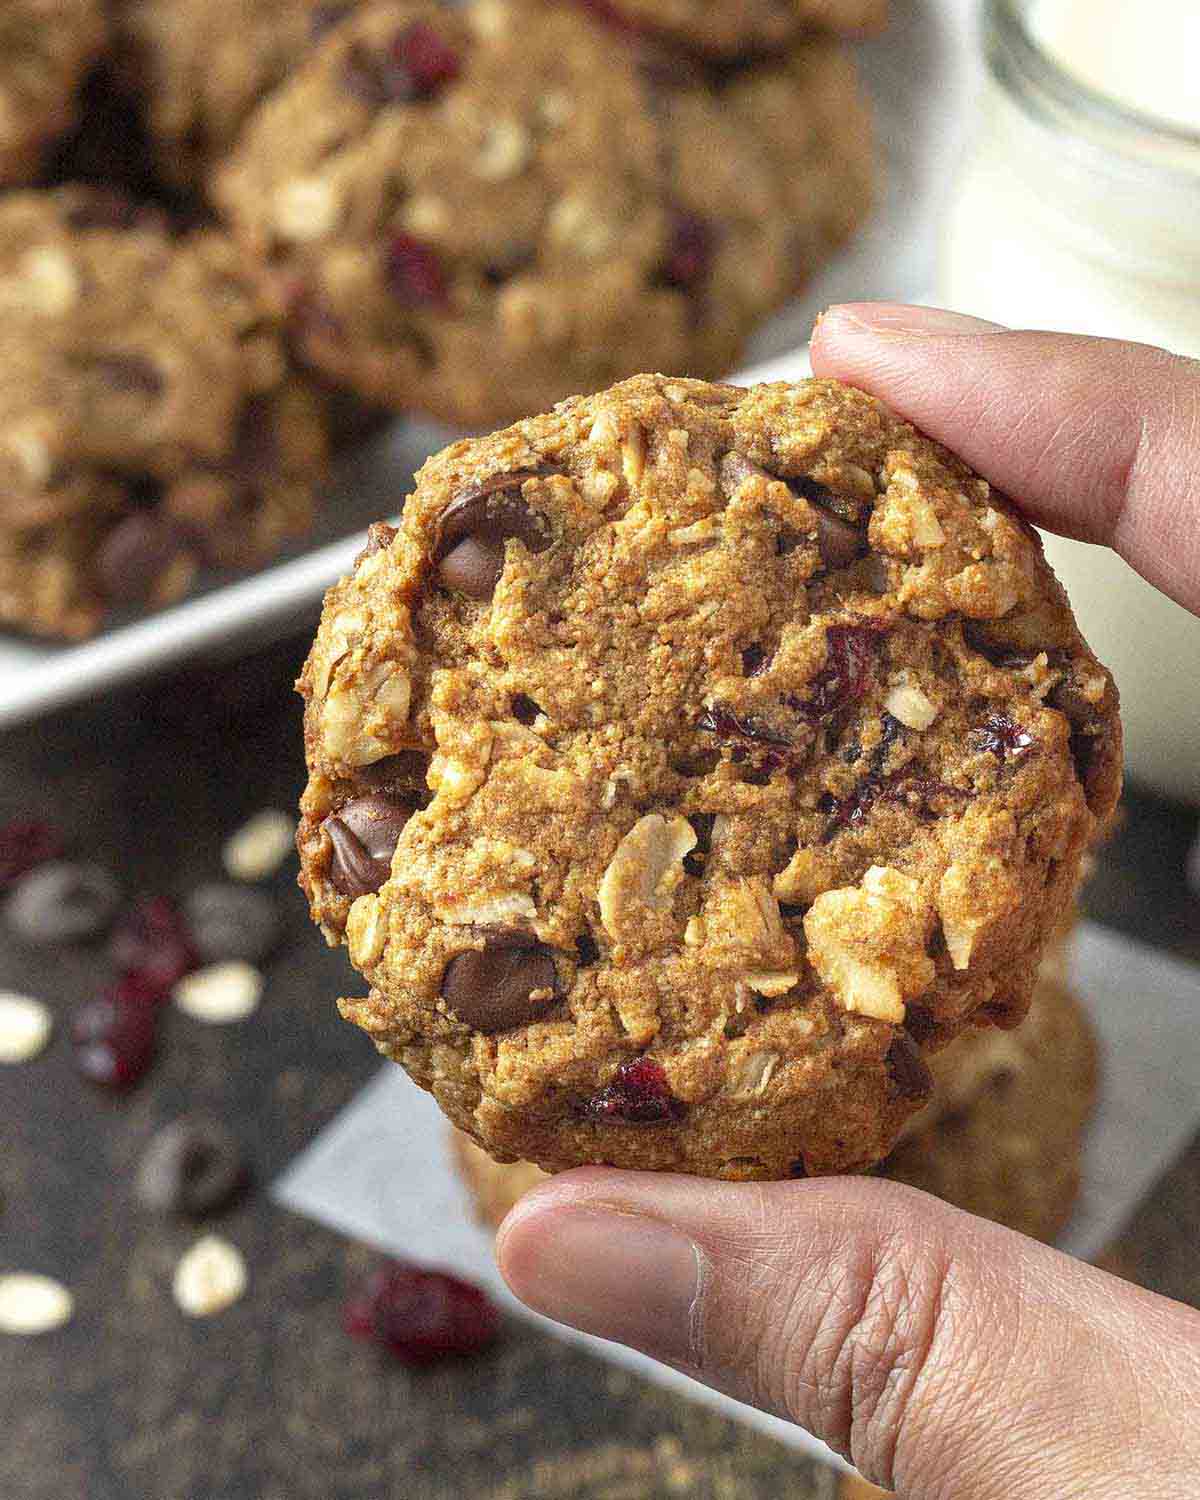 A hand holding up an oatmeal cranberry chocolate chip cookie to show the texture.